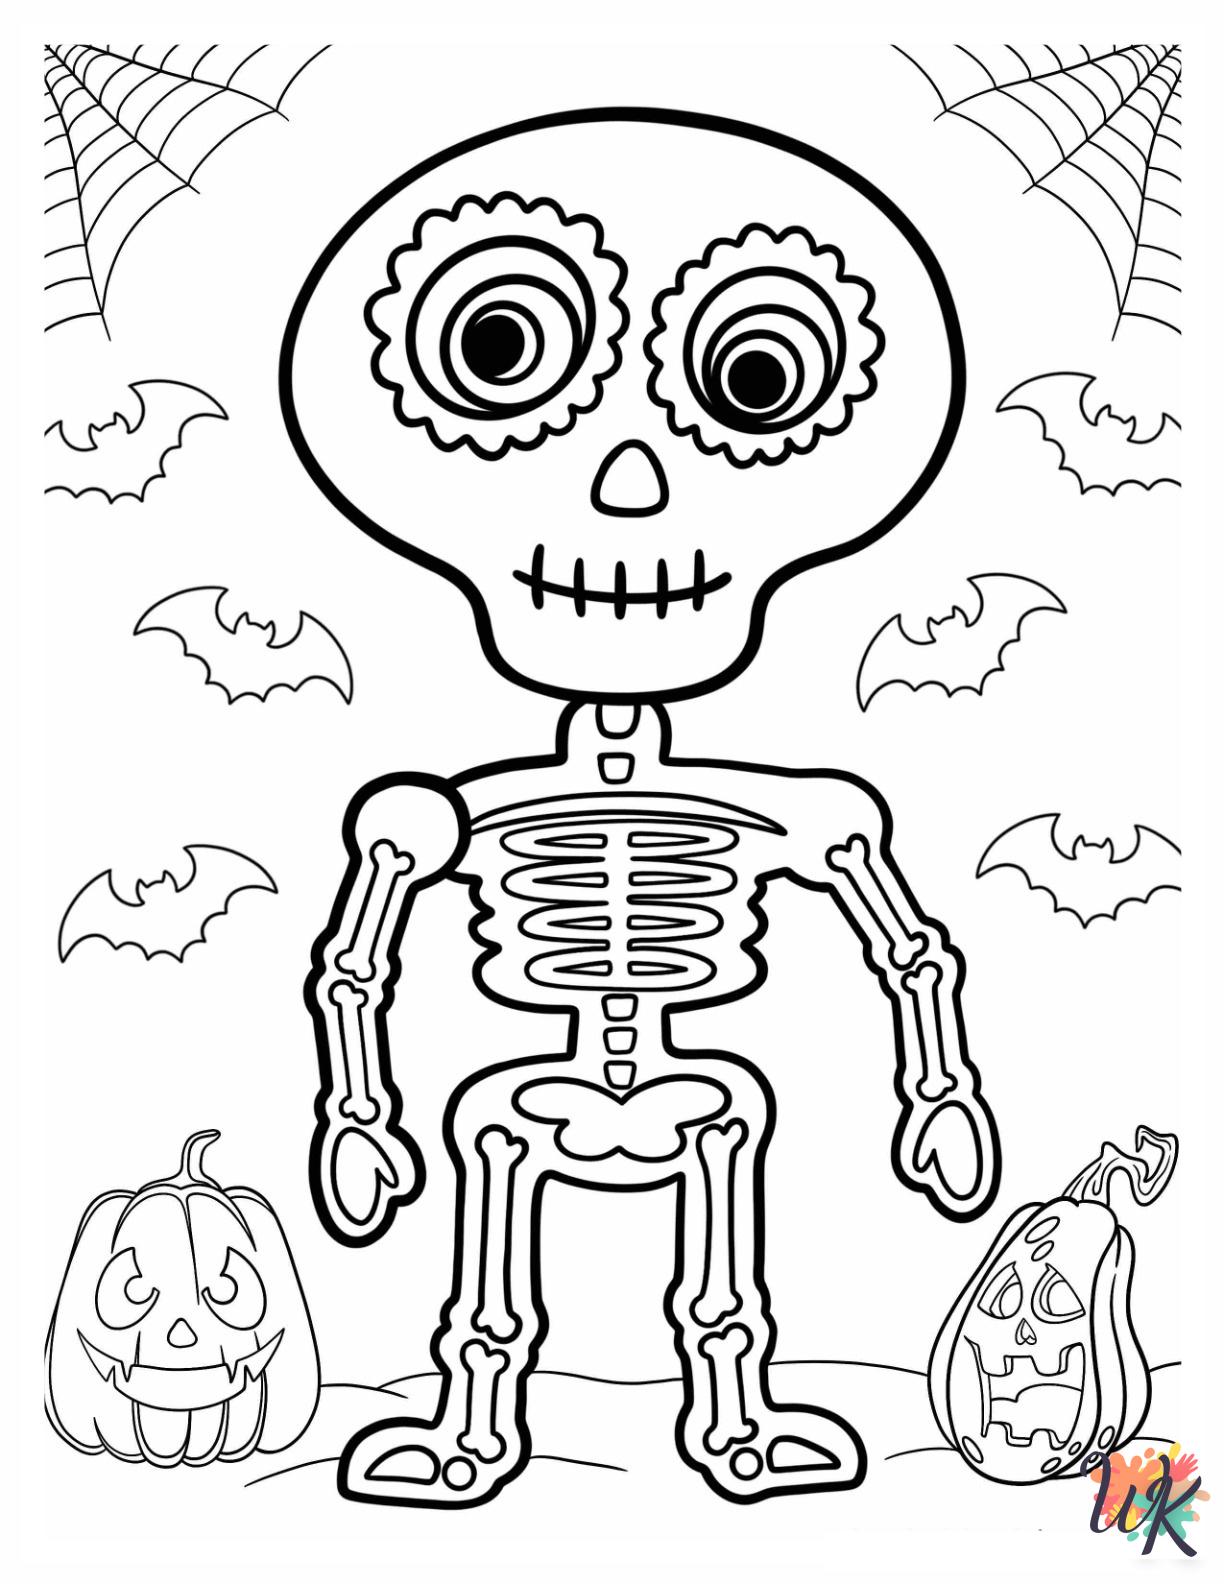 Skeleton coloring pages for adults pdf